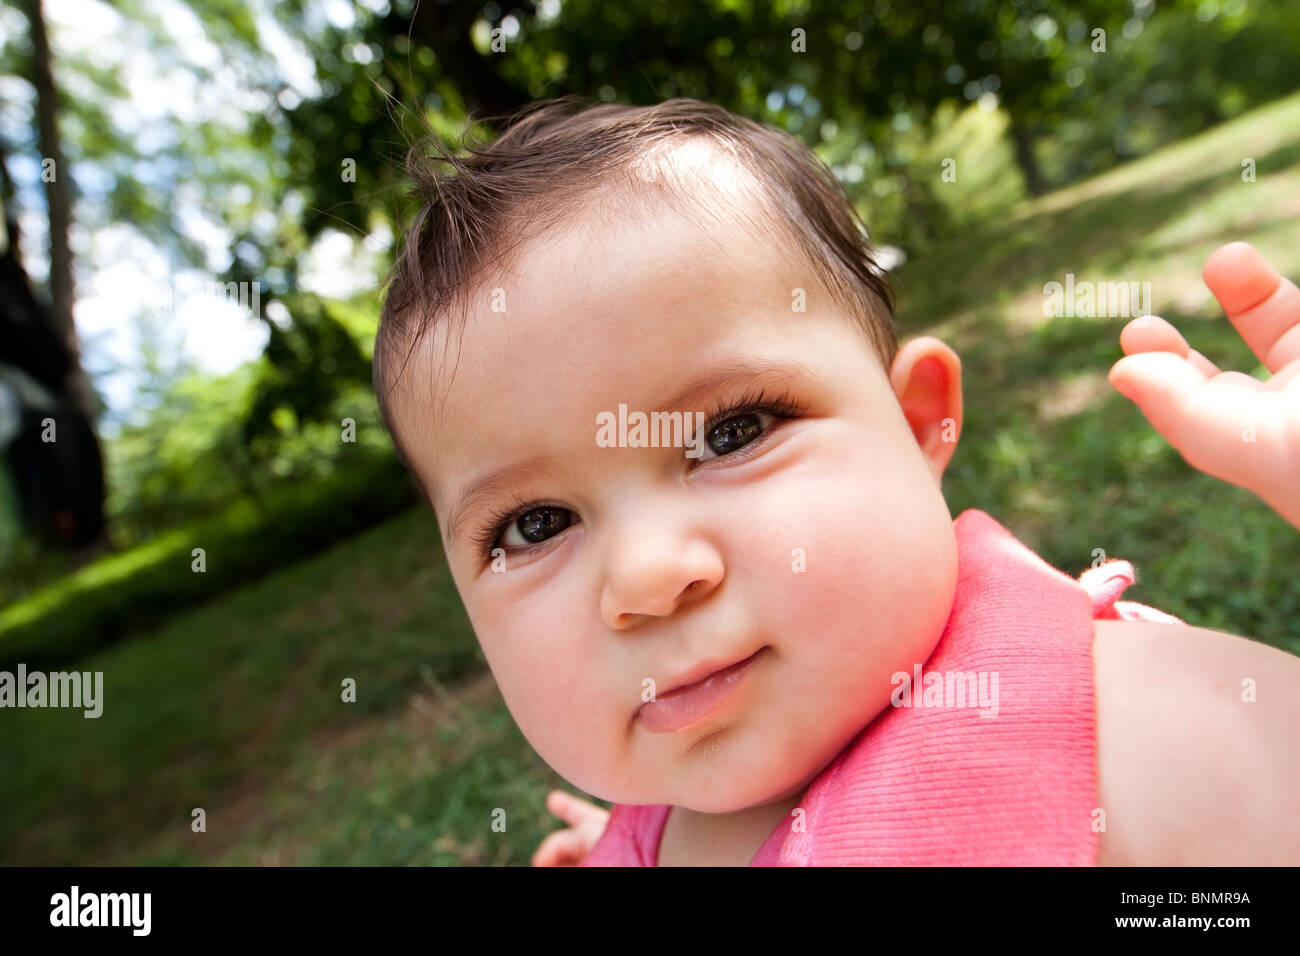 Caricature cute funny distorted baby face with big chubby cheeks of a Caucasian Hispanic infant girl with glossy eyes in a park. Stock Photo